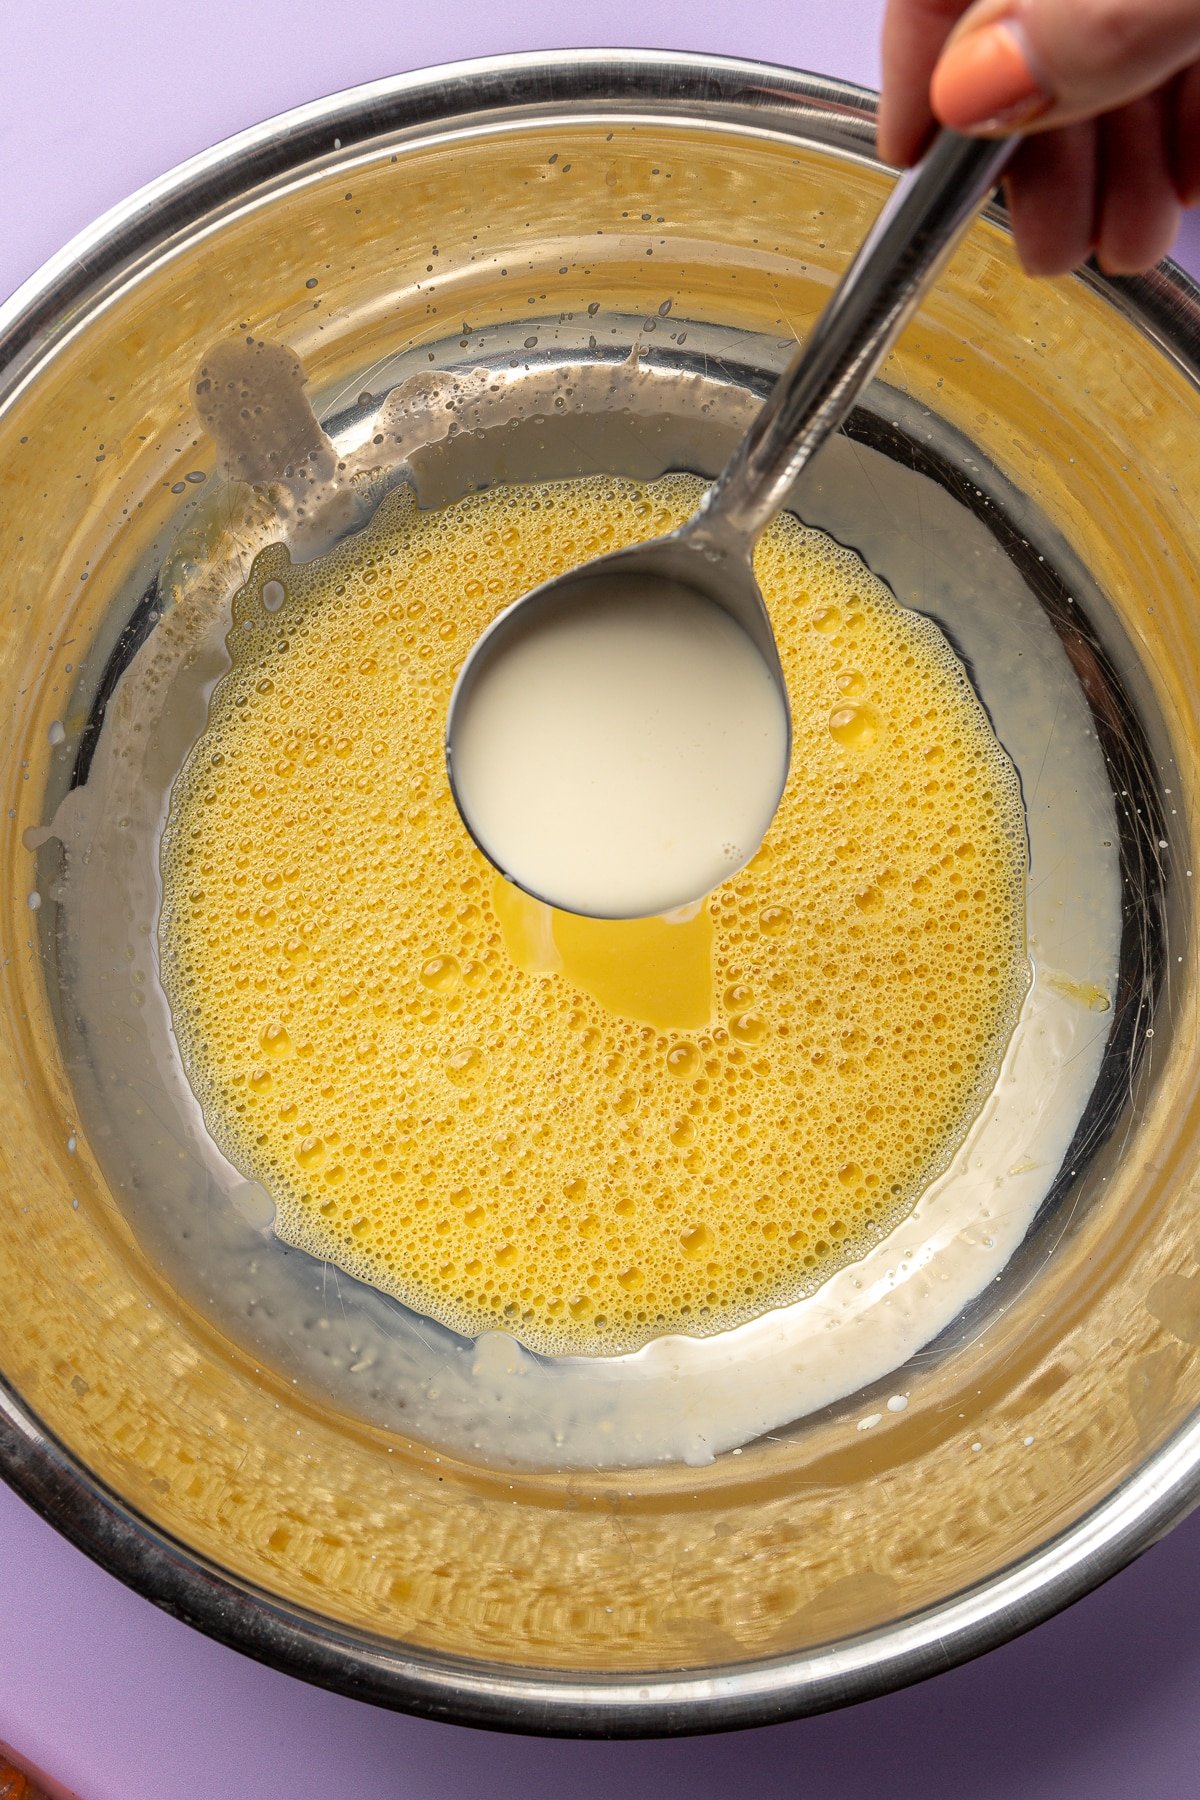 A hand is shown spooning in small amounts of the milky mixture into the egg mixture.